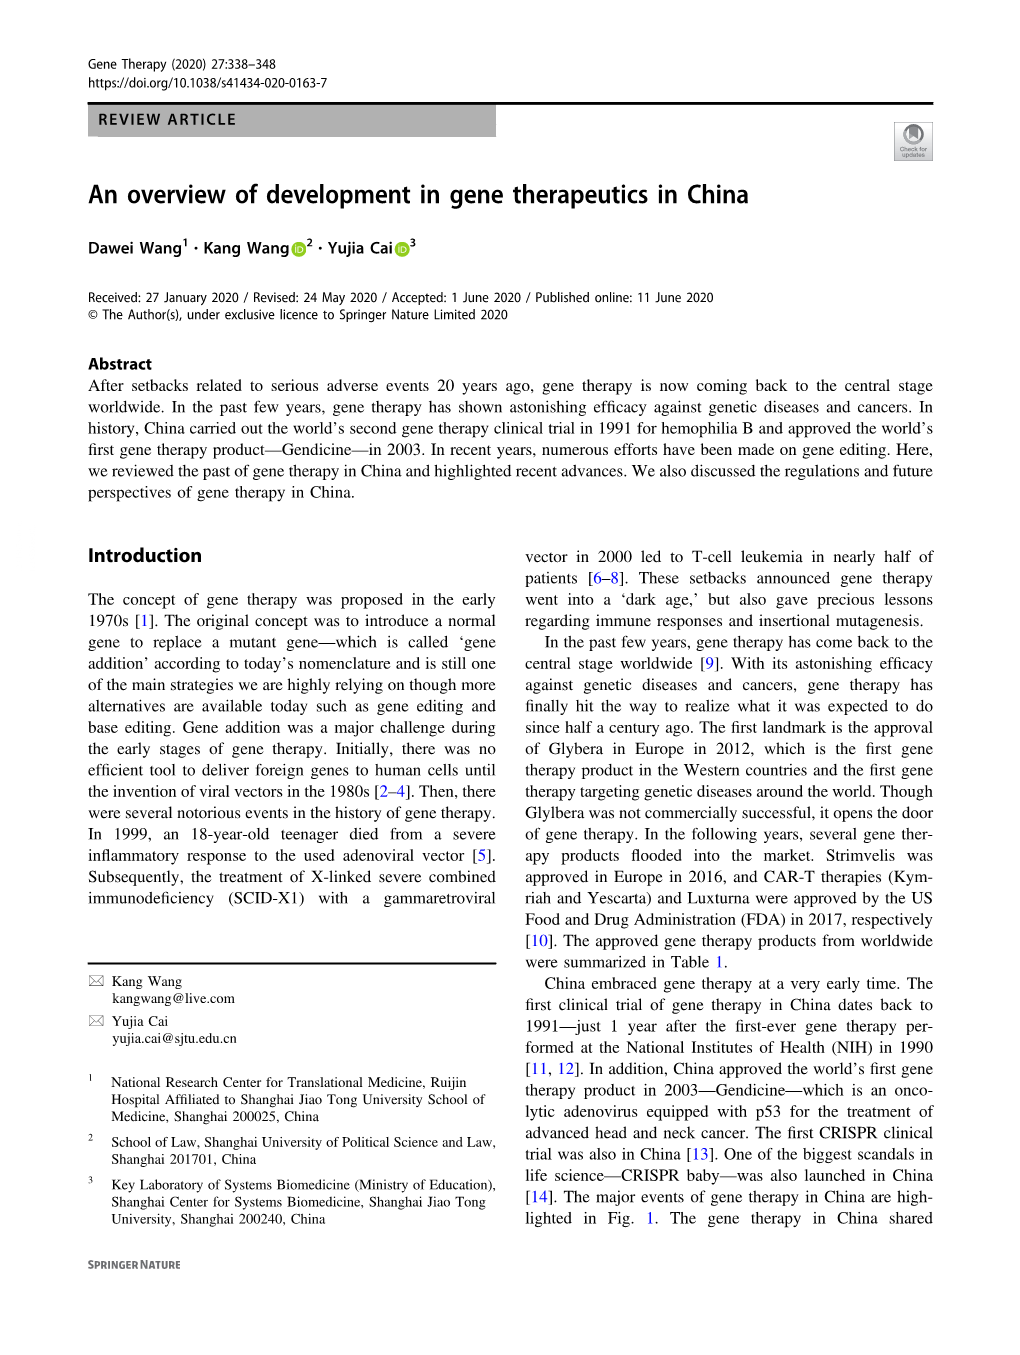 An Overview of Development in Gene Therapeutics in China